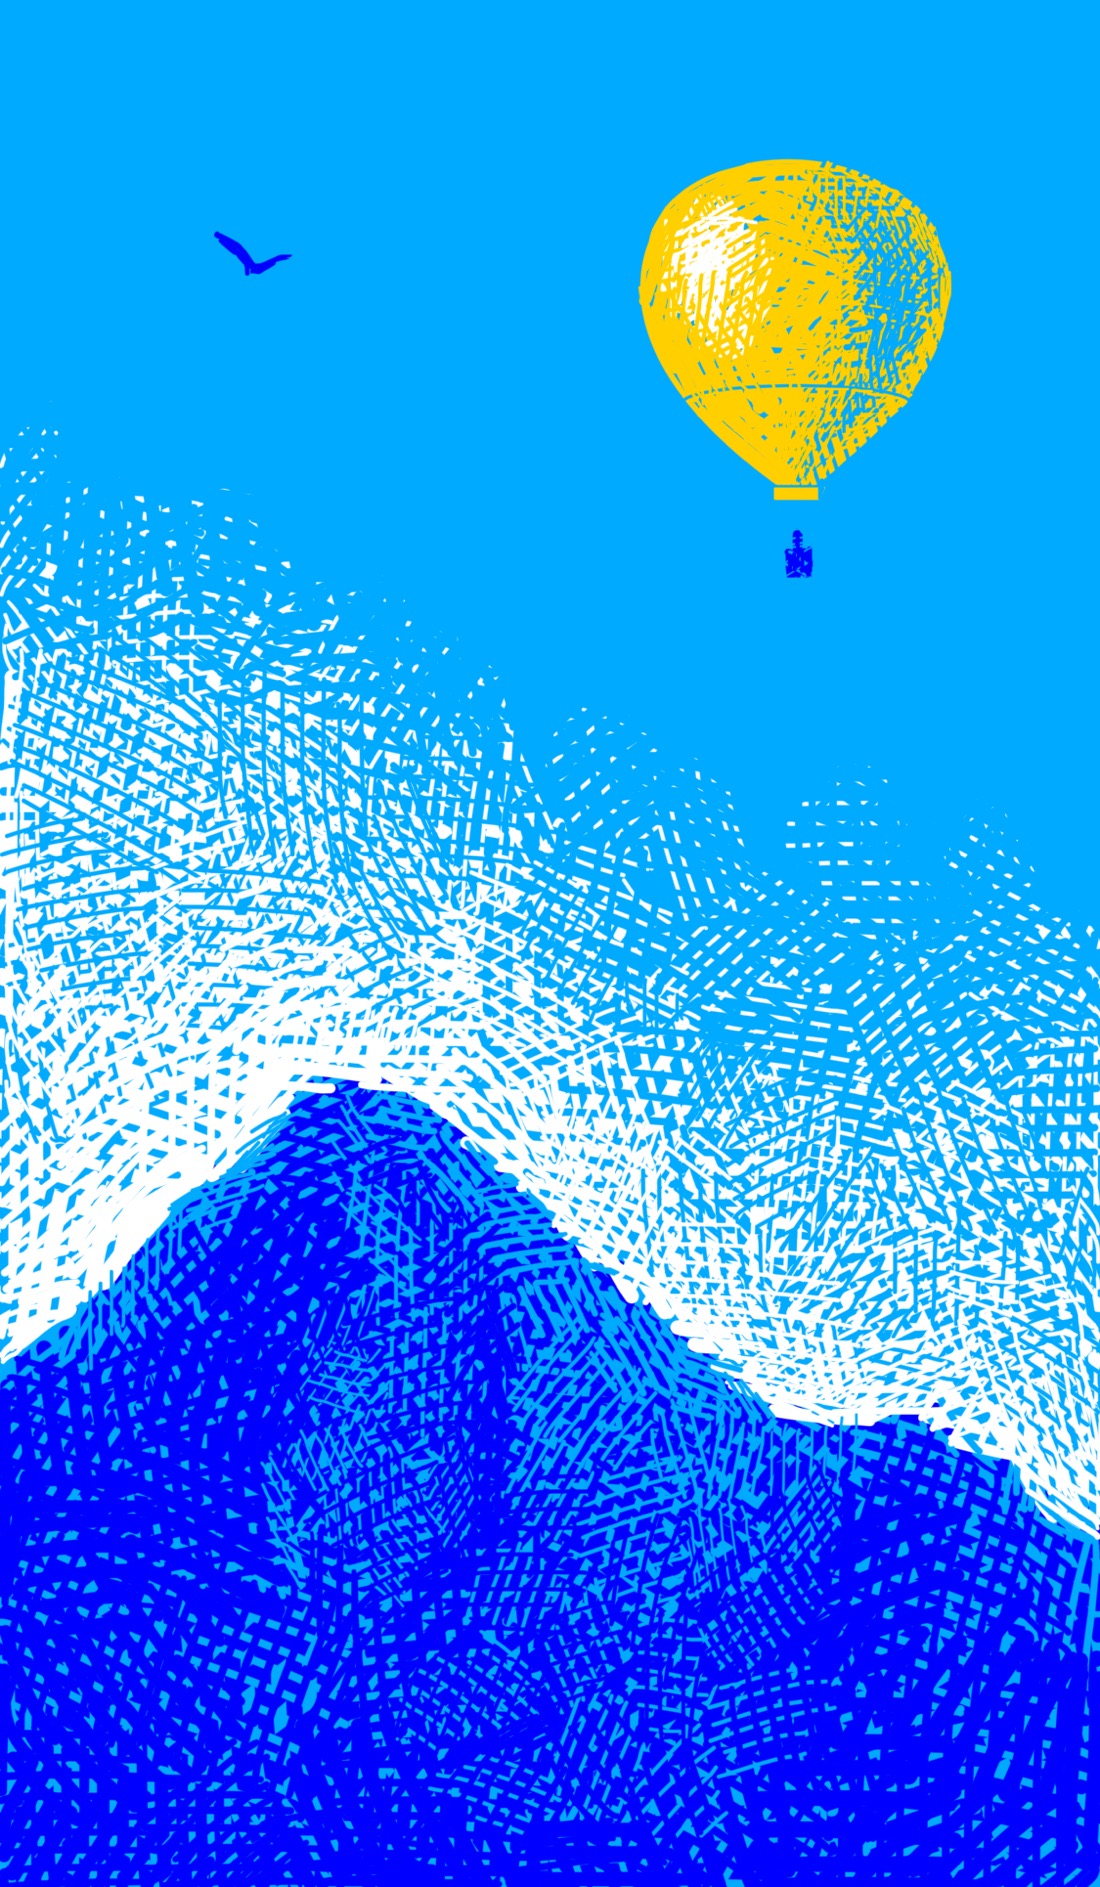 A mountain peak, a clear blue sky, and a bright yellow hot air balloon drifting in the top right. In the top left is an eagle, high above the mountain. There is no more to this place than this.